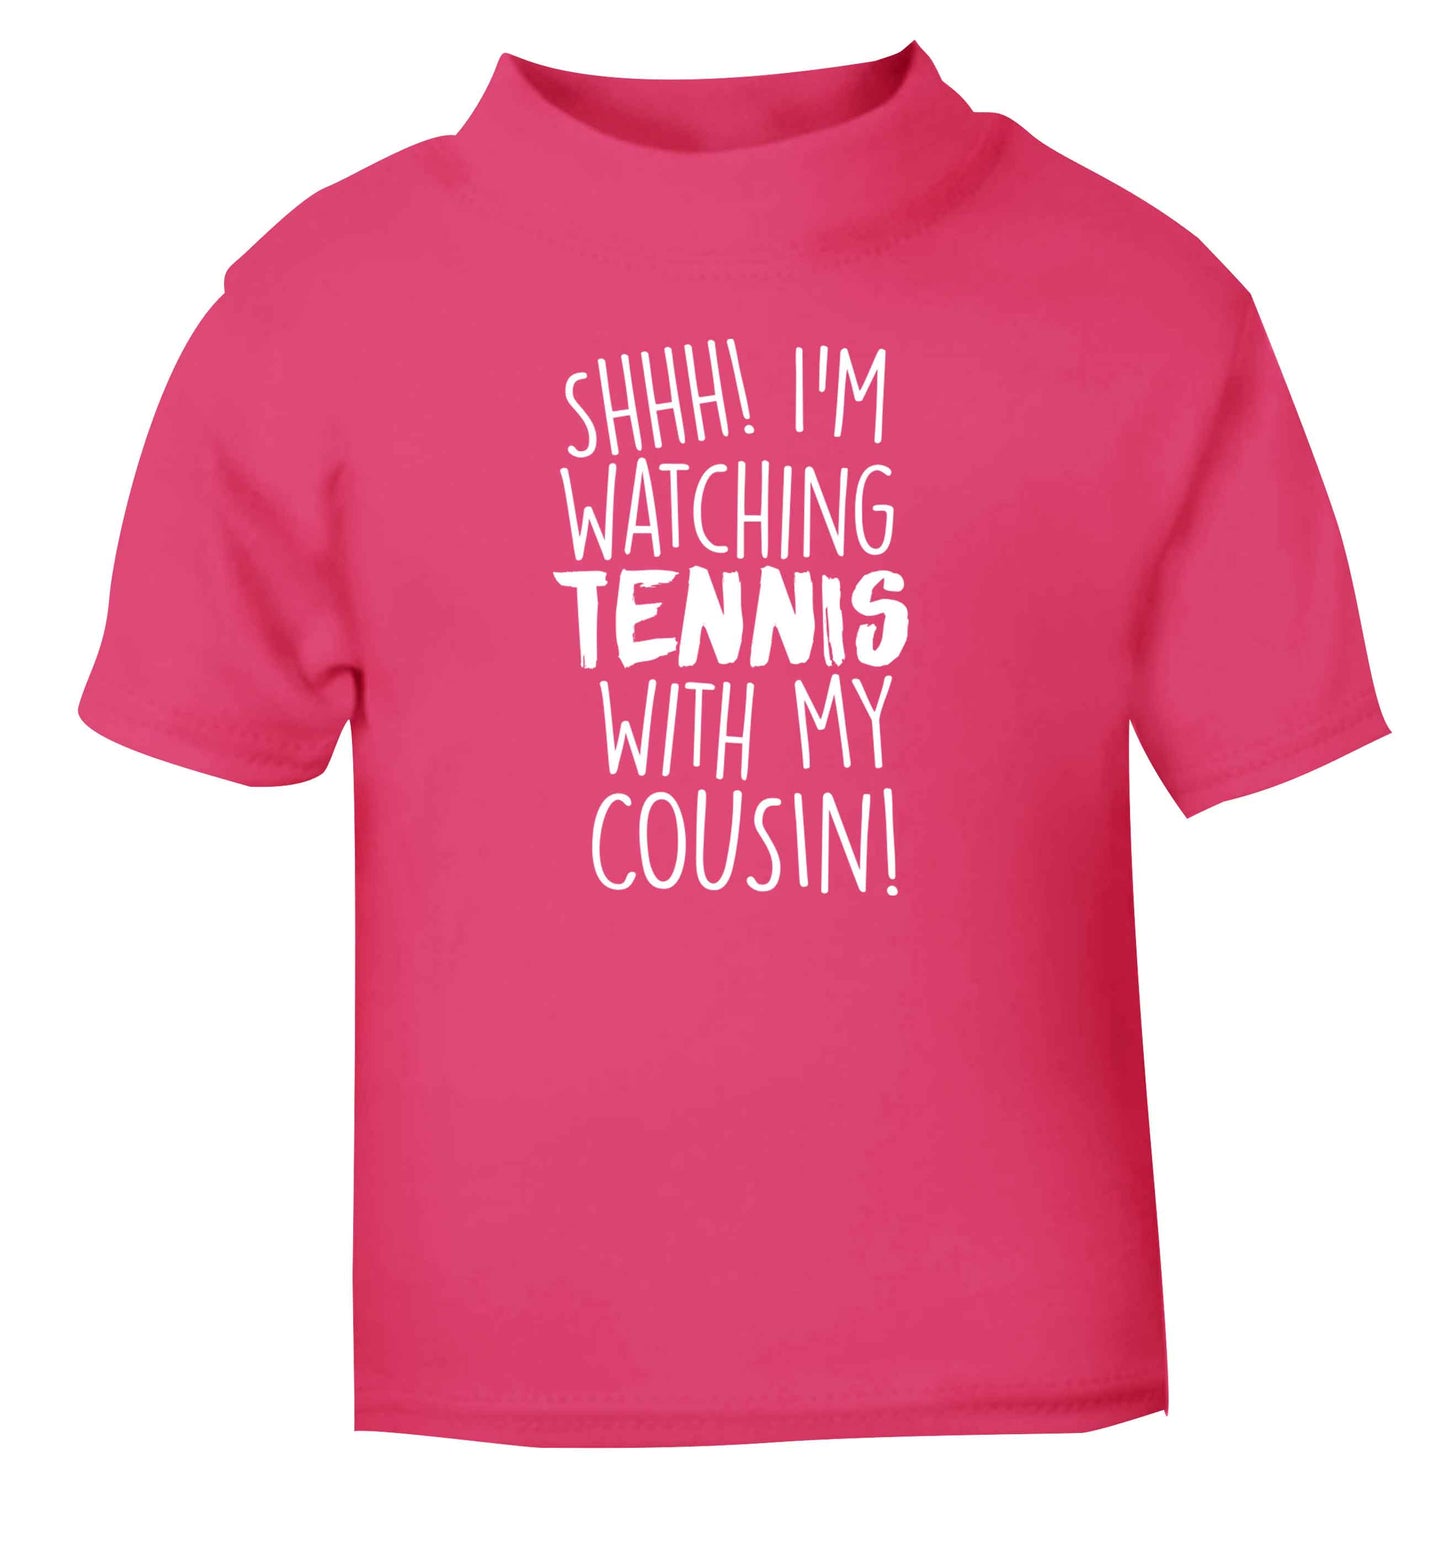 Shh! I'm watching tennis with my cousin! pink Baby Toddler Tshirt 2 Years